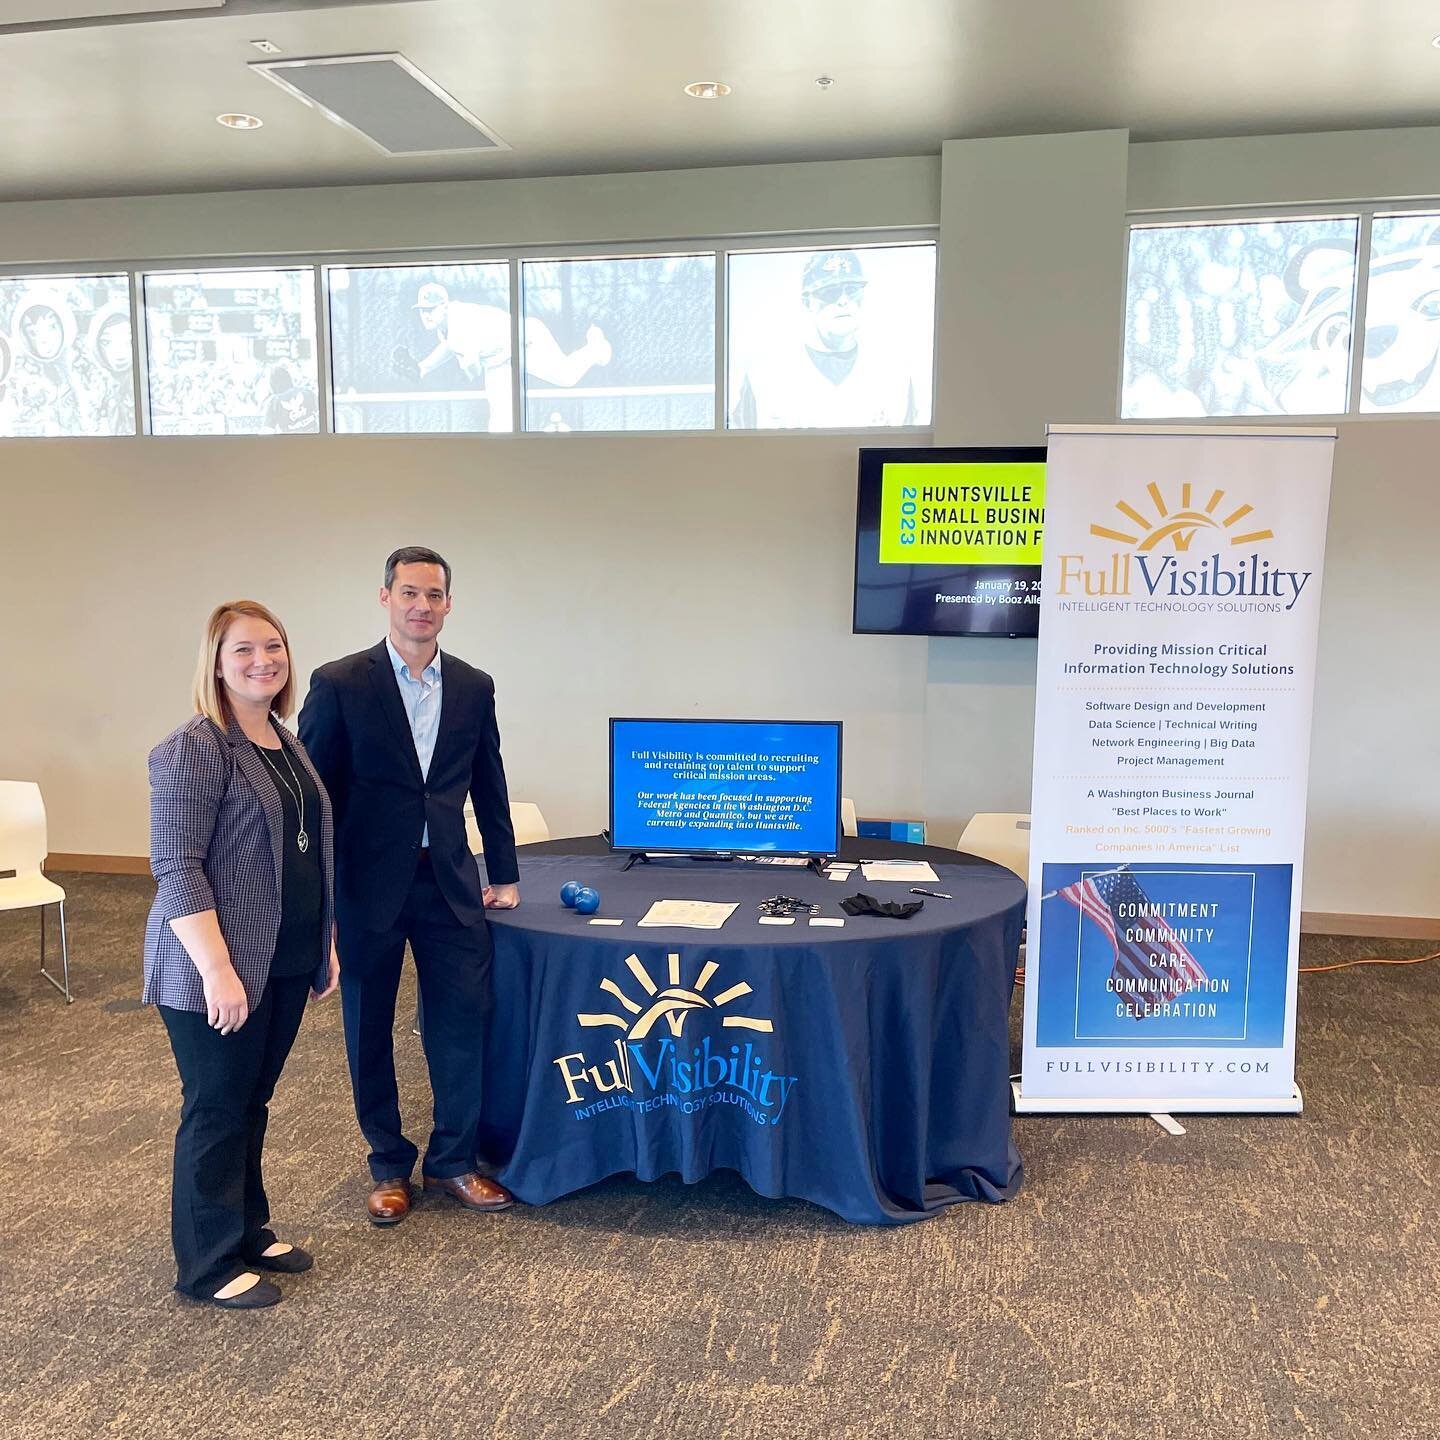 Our team had a great time at the Huntsville Small Business Innovation Fair presented by @boozallen . 
⁣
It was so nice to meet other industry partners and folks in Huntsville as we continue to expand our presence there. What a great way to kick off 2